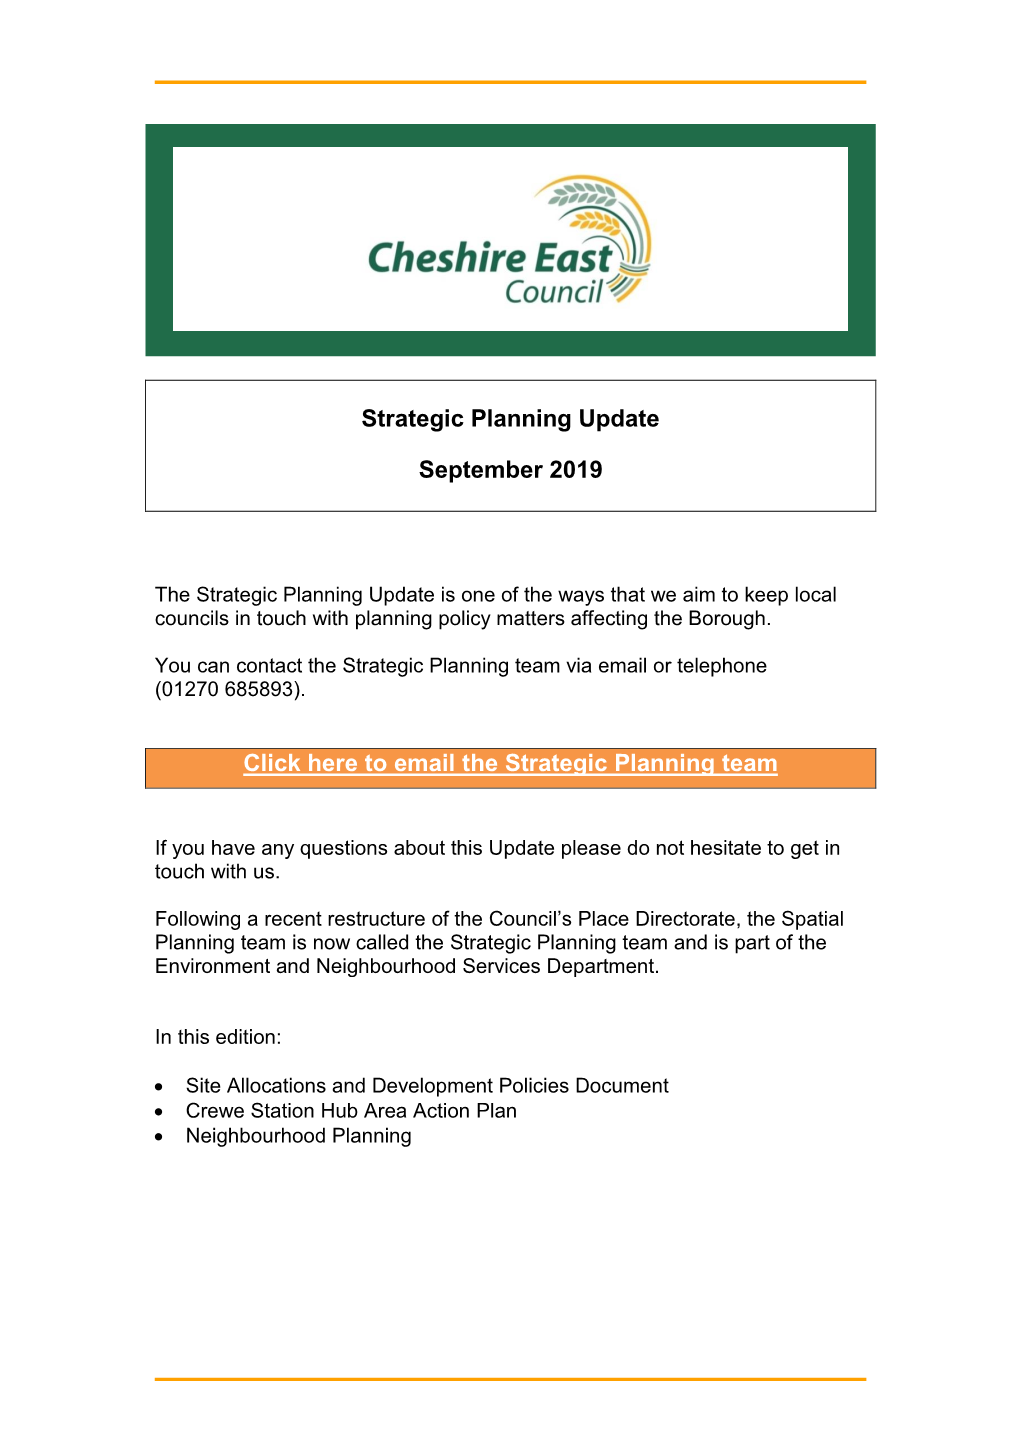 Strategic Planning Update September 2019 Click Here to Email The